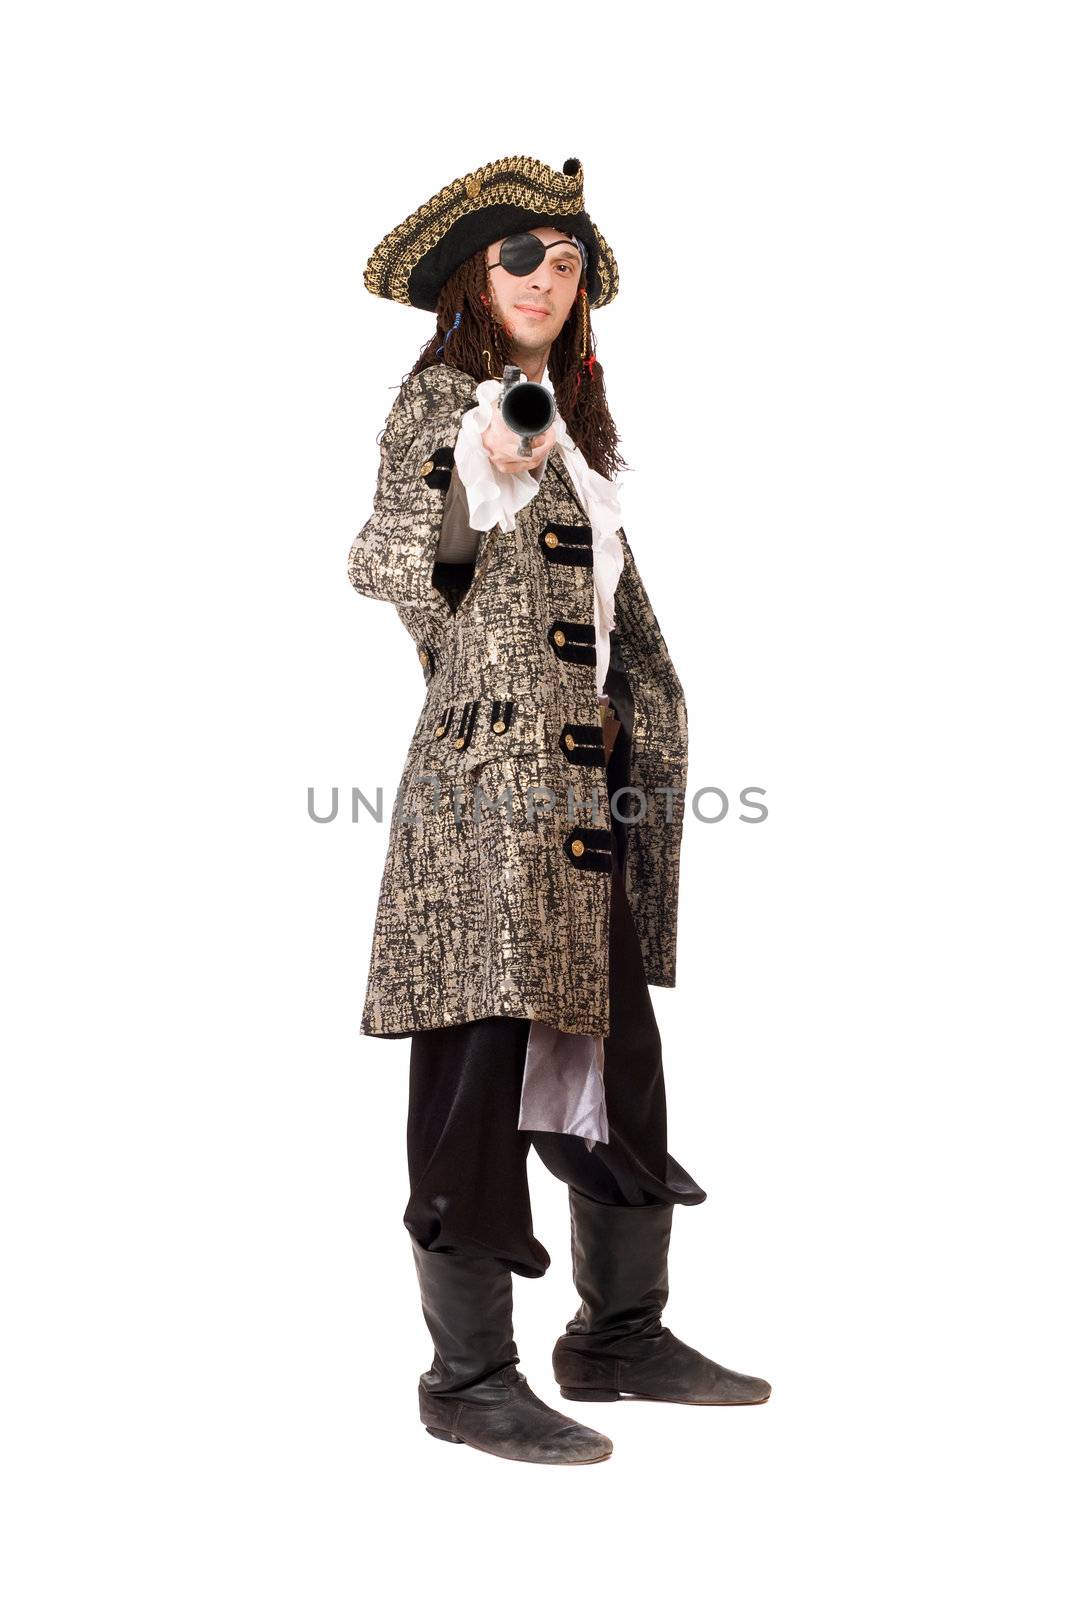 Pirate with a pistol in hand. Isolated